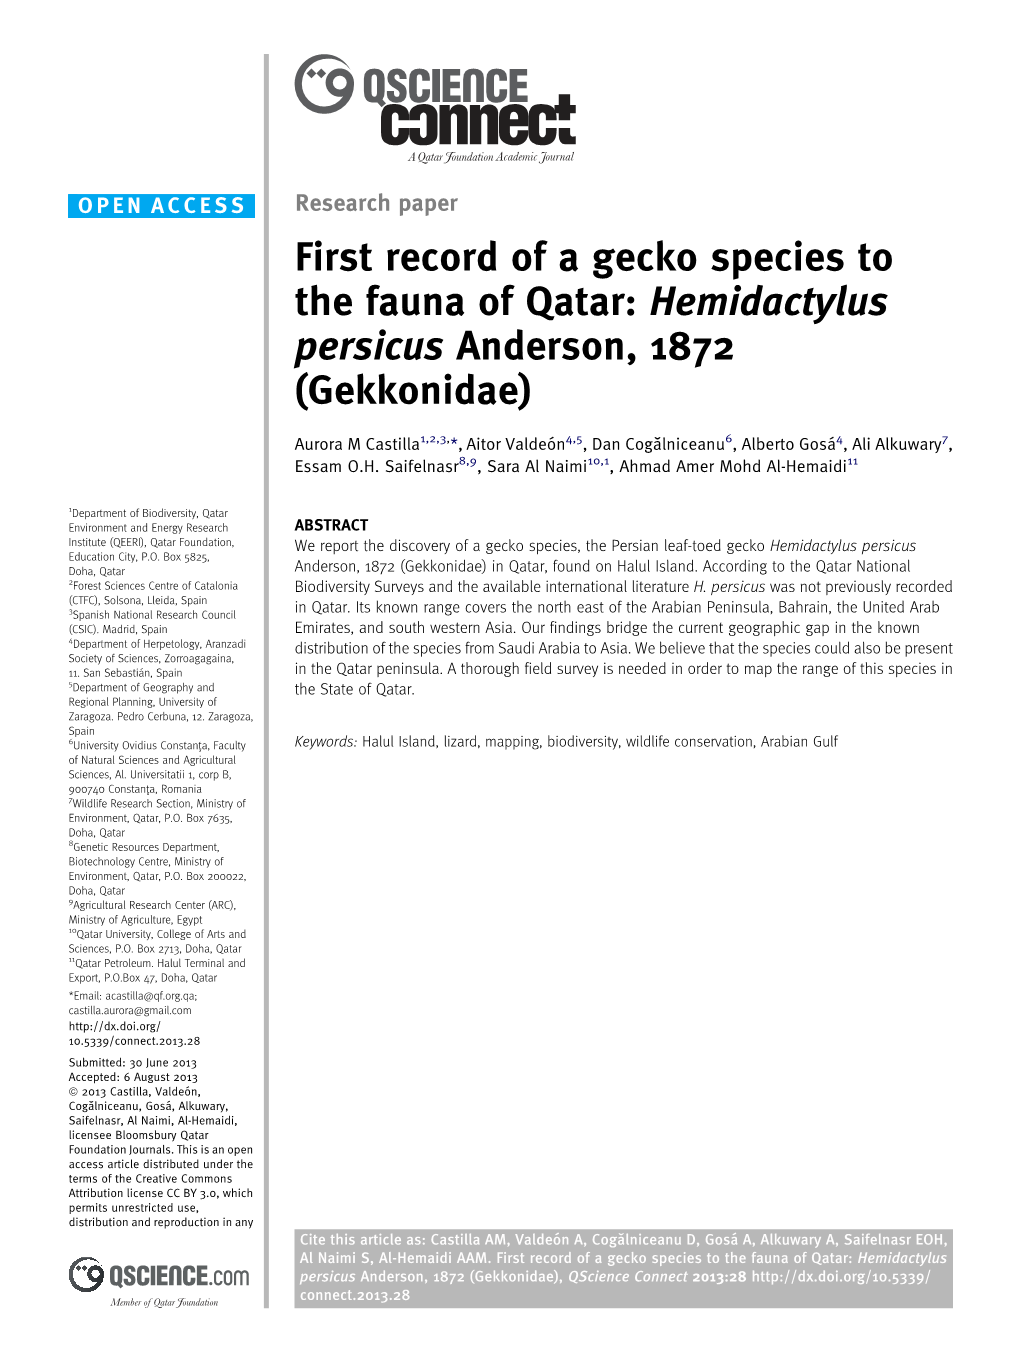 First Record of a Gecko Species to the Fauna of Qatar: Hemidactylus Persicus Anderson, 1872 (Gekkonidae)